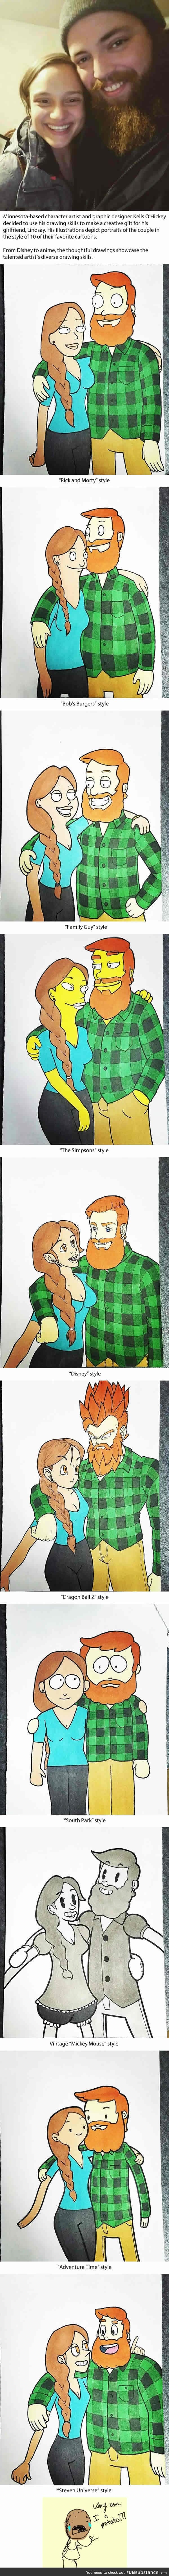 Guy Surprises Girlfriend with Illustrations Of Them Together In 10 Different Styles